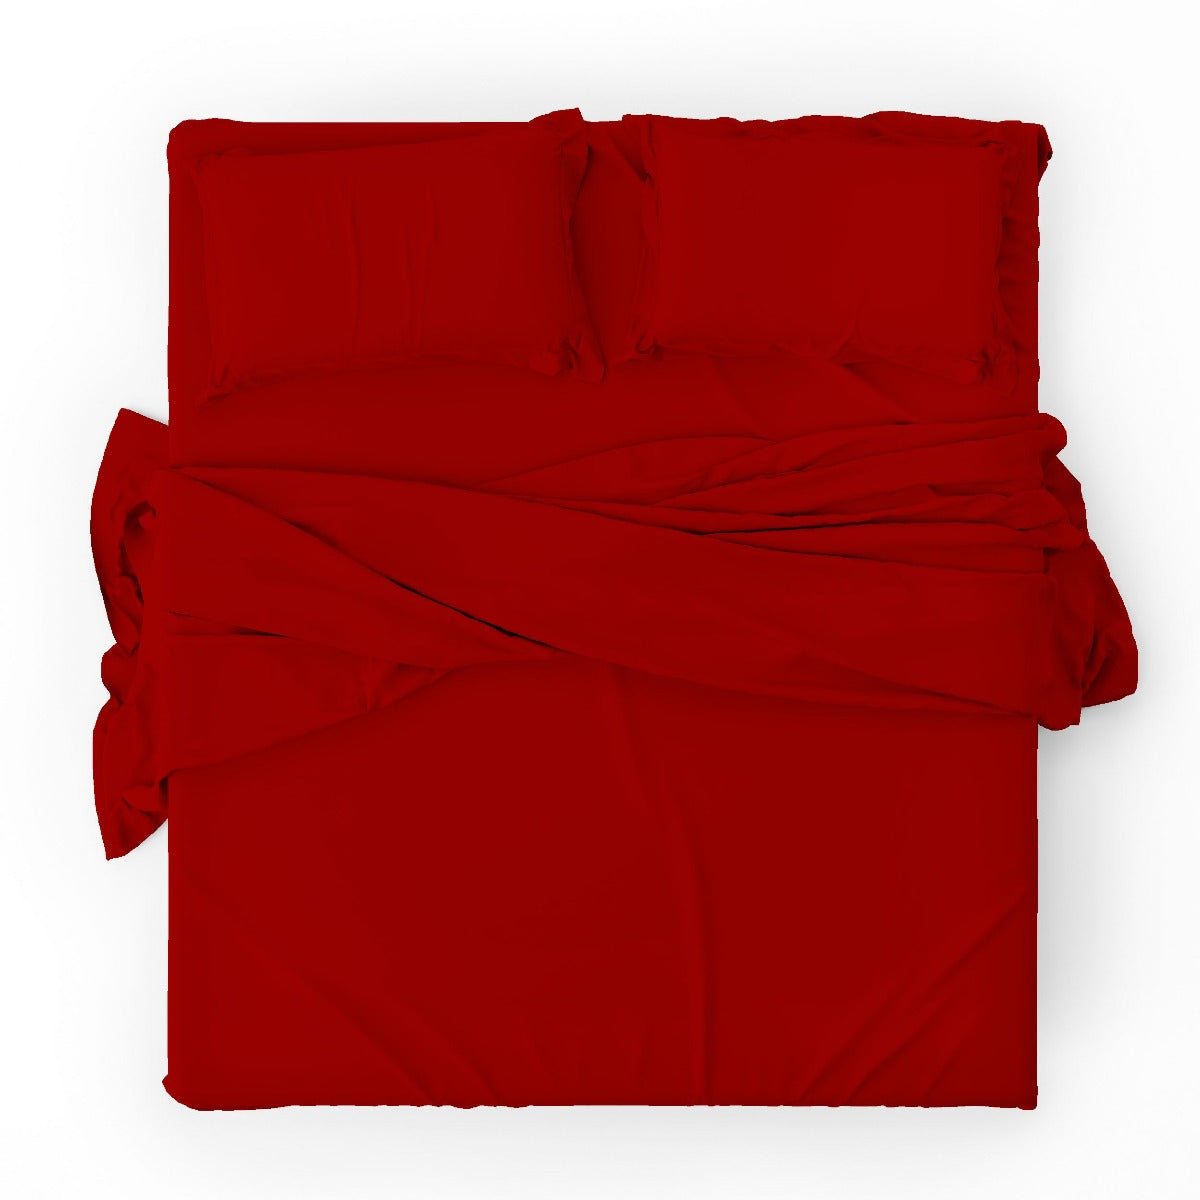 Duvet cover with pillowcases - Solid Color Red